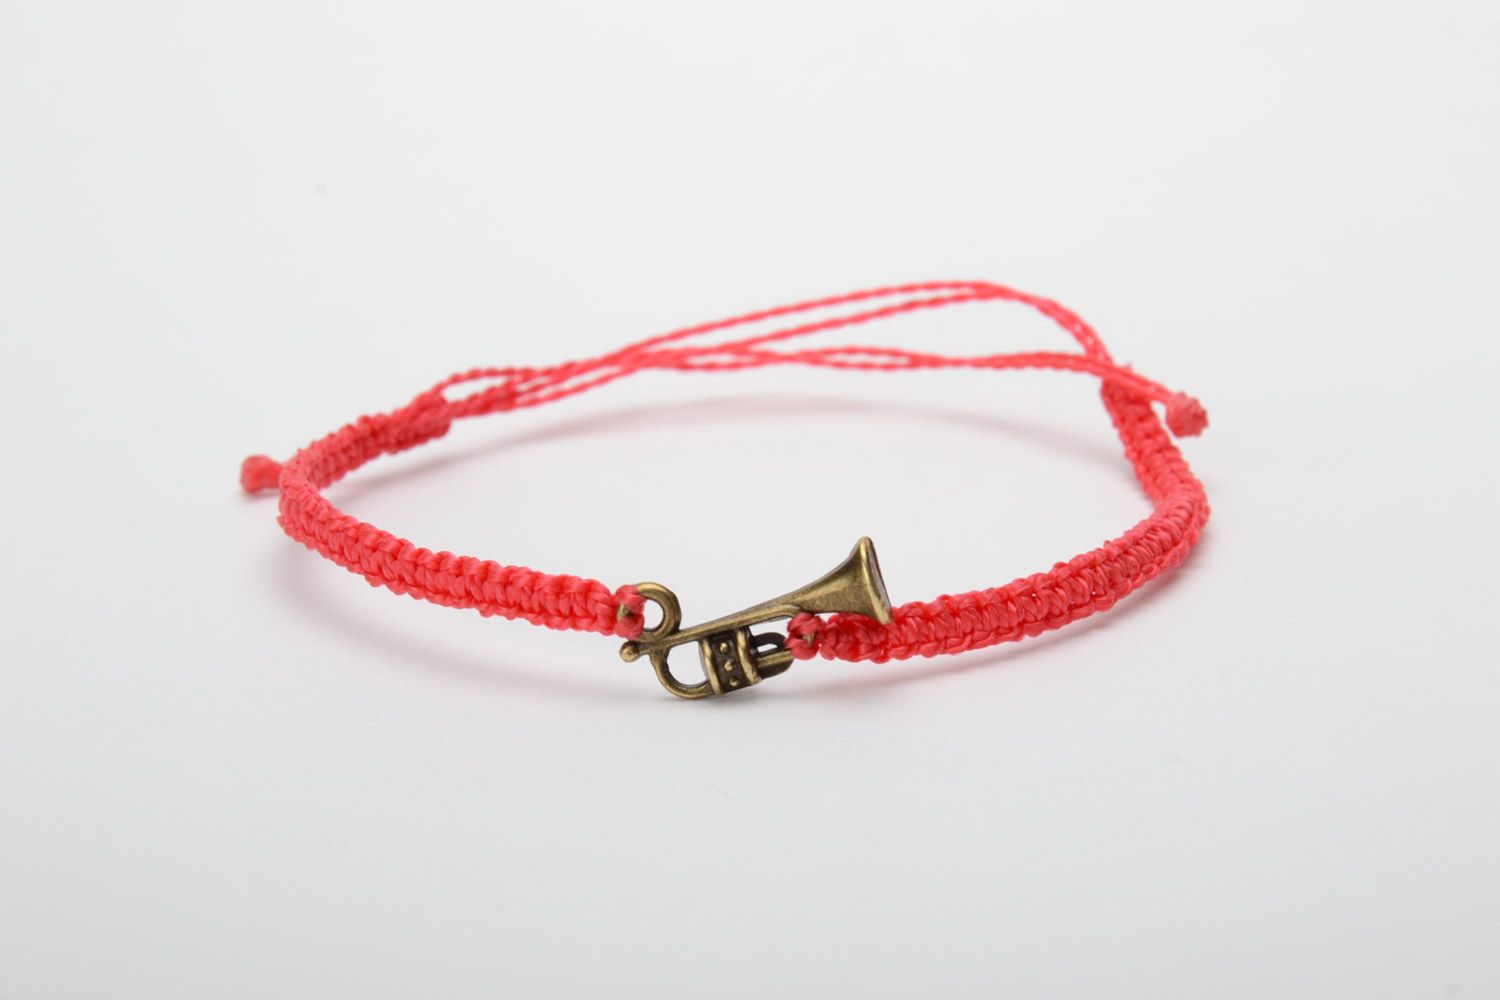 Handmade red woven capron thread bracelet with metal charm in the shape of saxophone photo 5